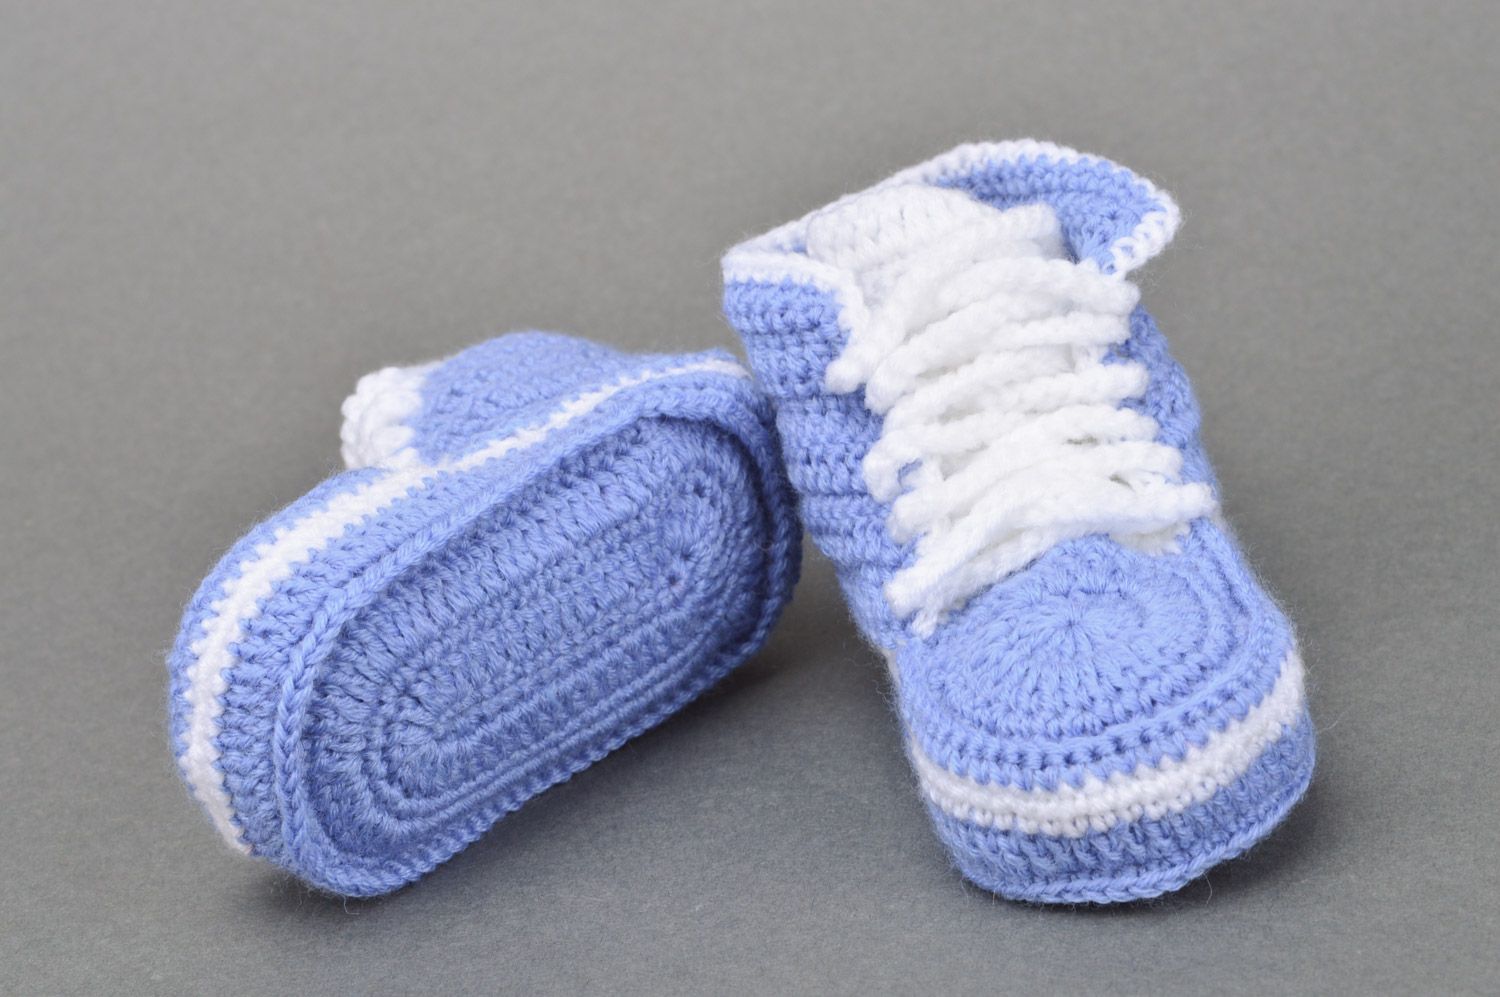 Handmade small crocheted blue baby sneakers with white shoelaces  photo 5